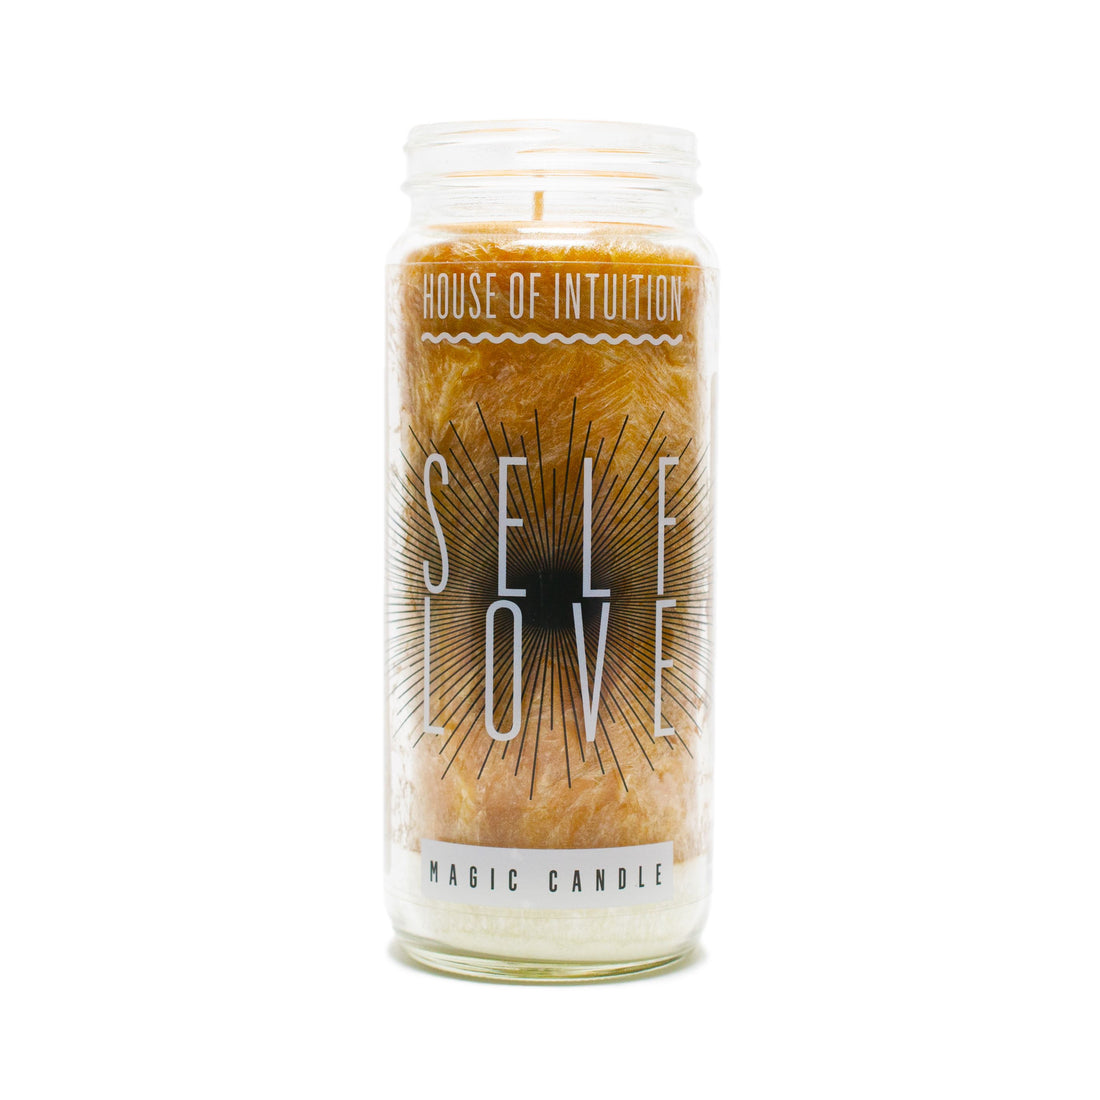 Self Love Magic Candle Magic Candles House of Intuition 